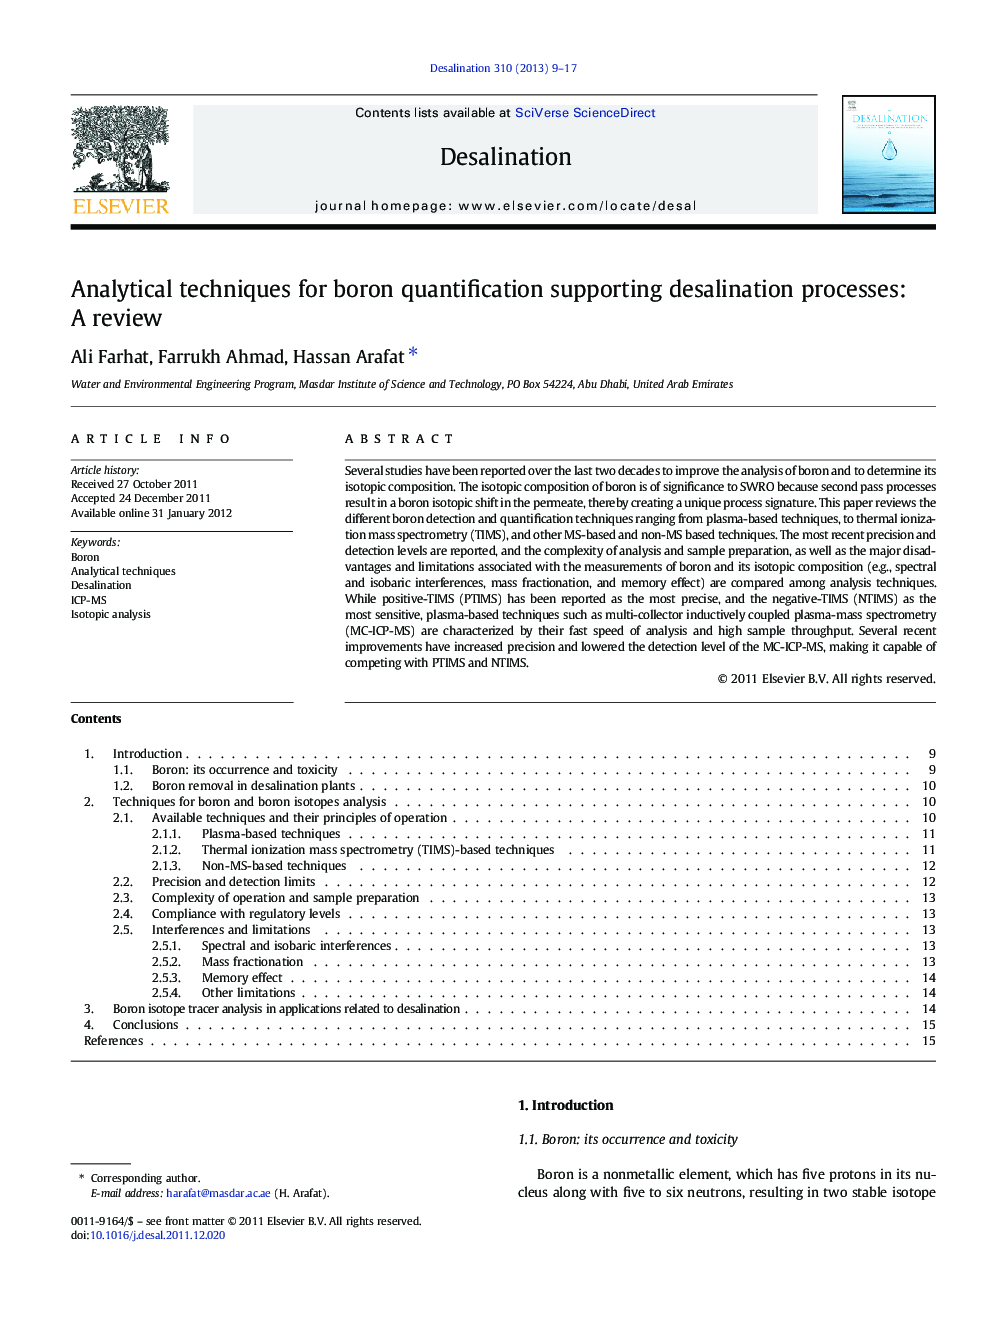 Analytical techniques for boron quantification supporting desalination processes: A review